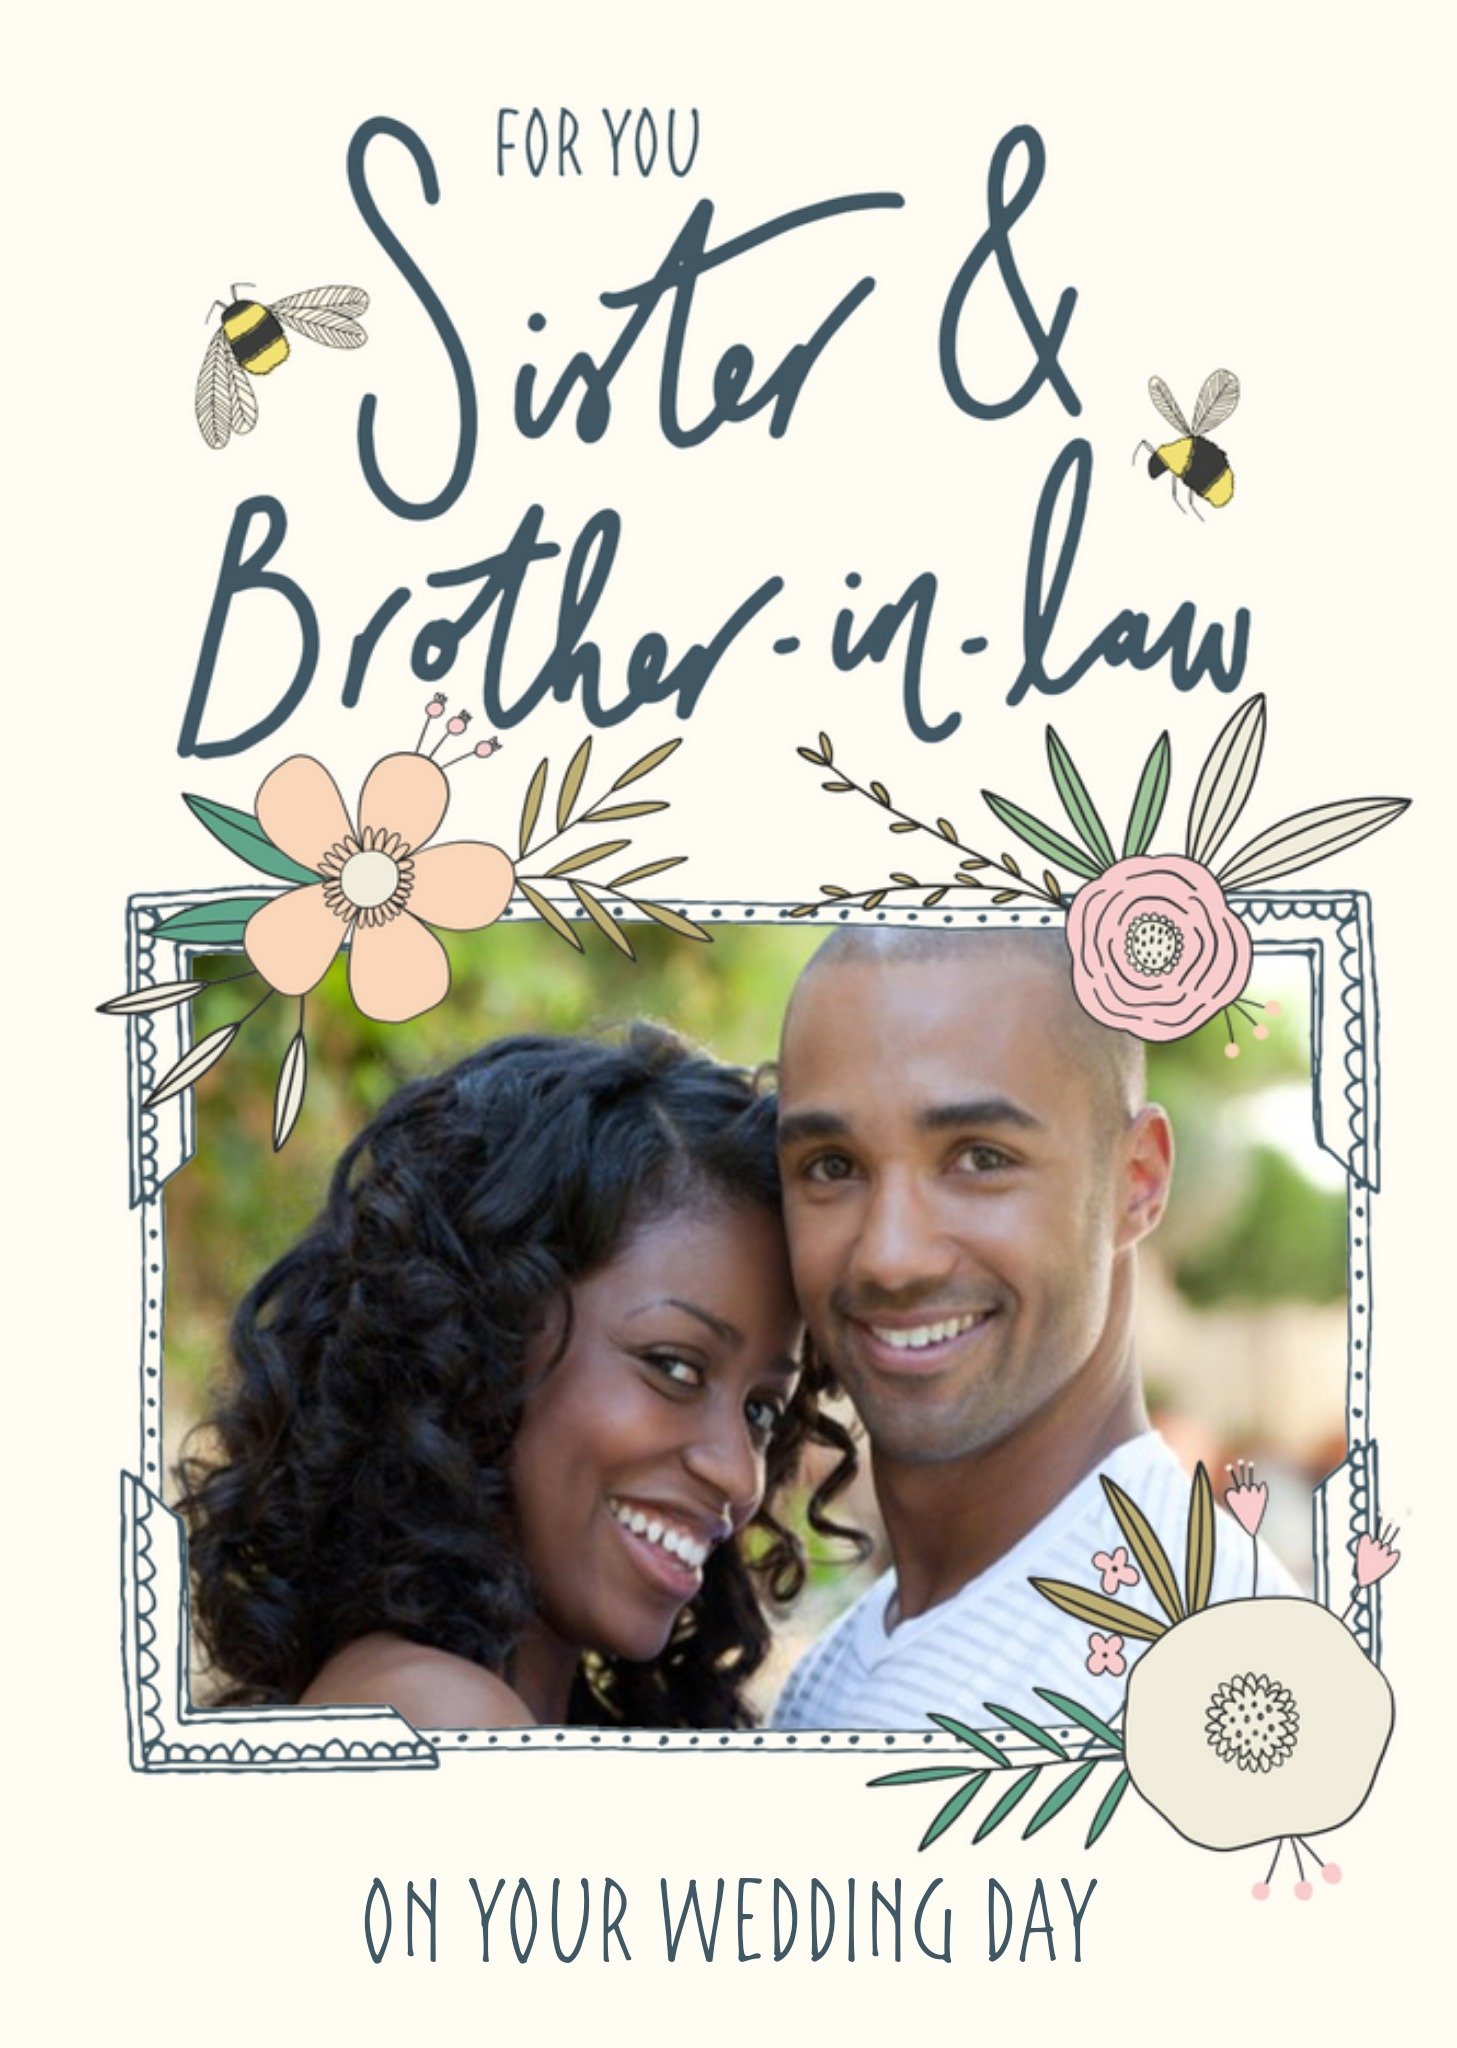 Moonpig Floral Photo Upload Wedding Card - Sister And Brother-In-Law - Traditional Flowers And Bumbl